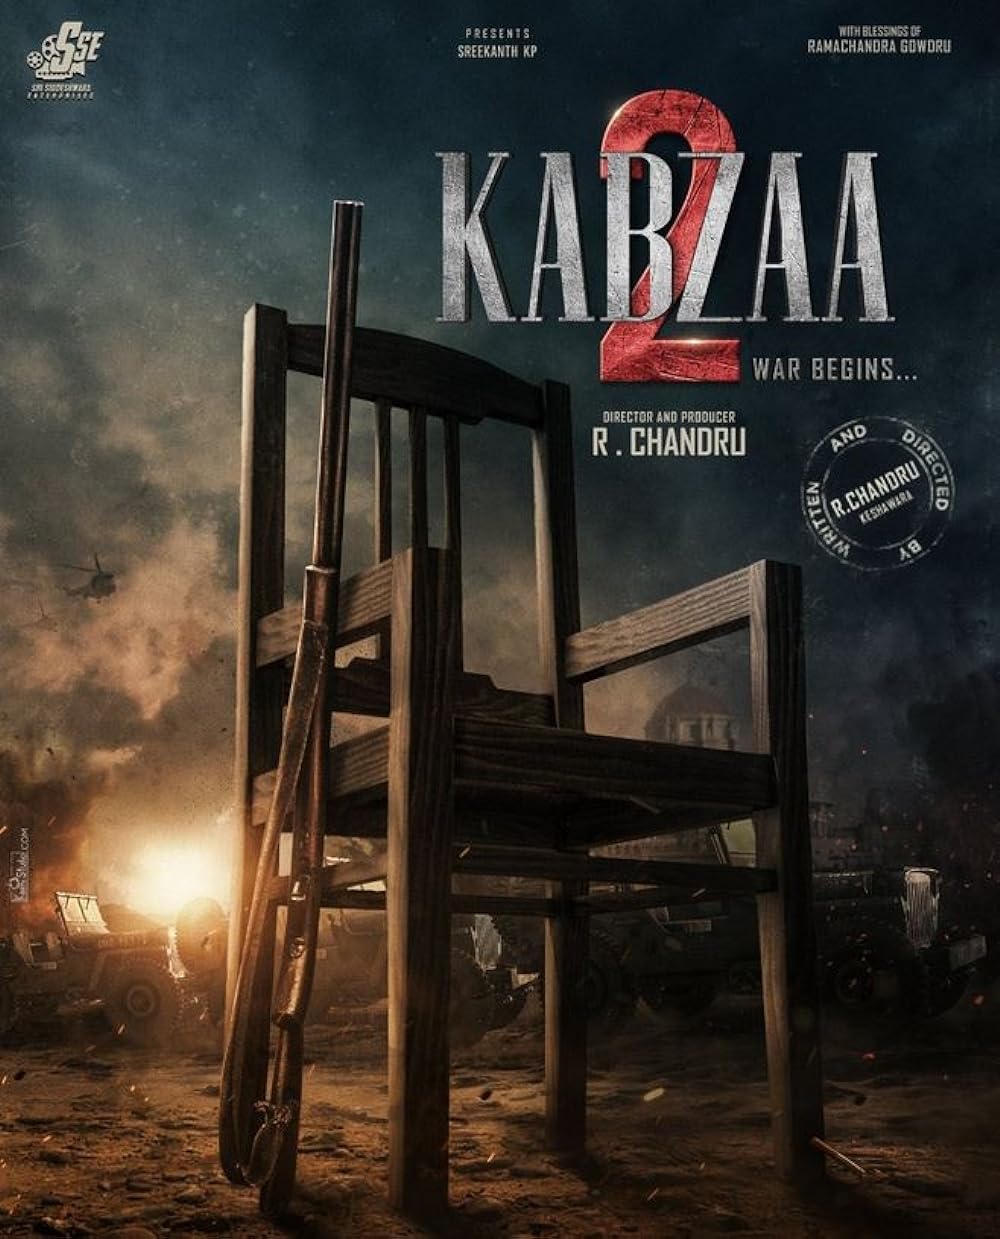 Kabzaa 2 Movie Review